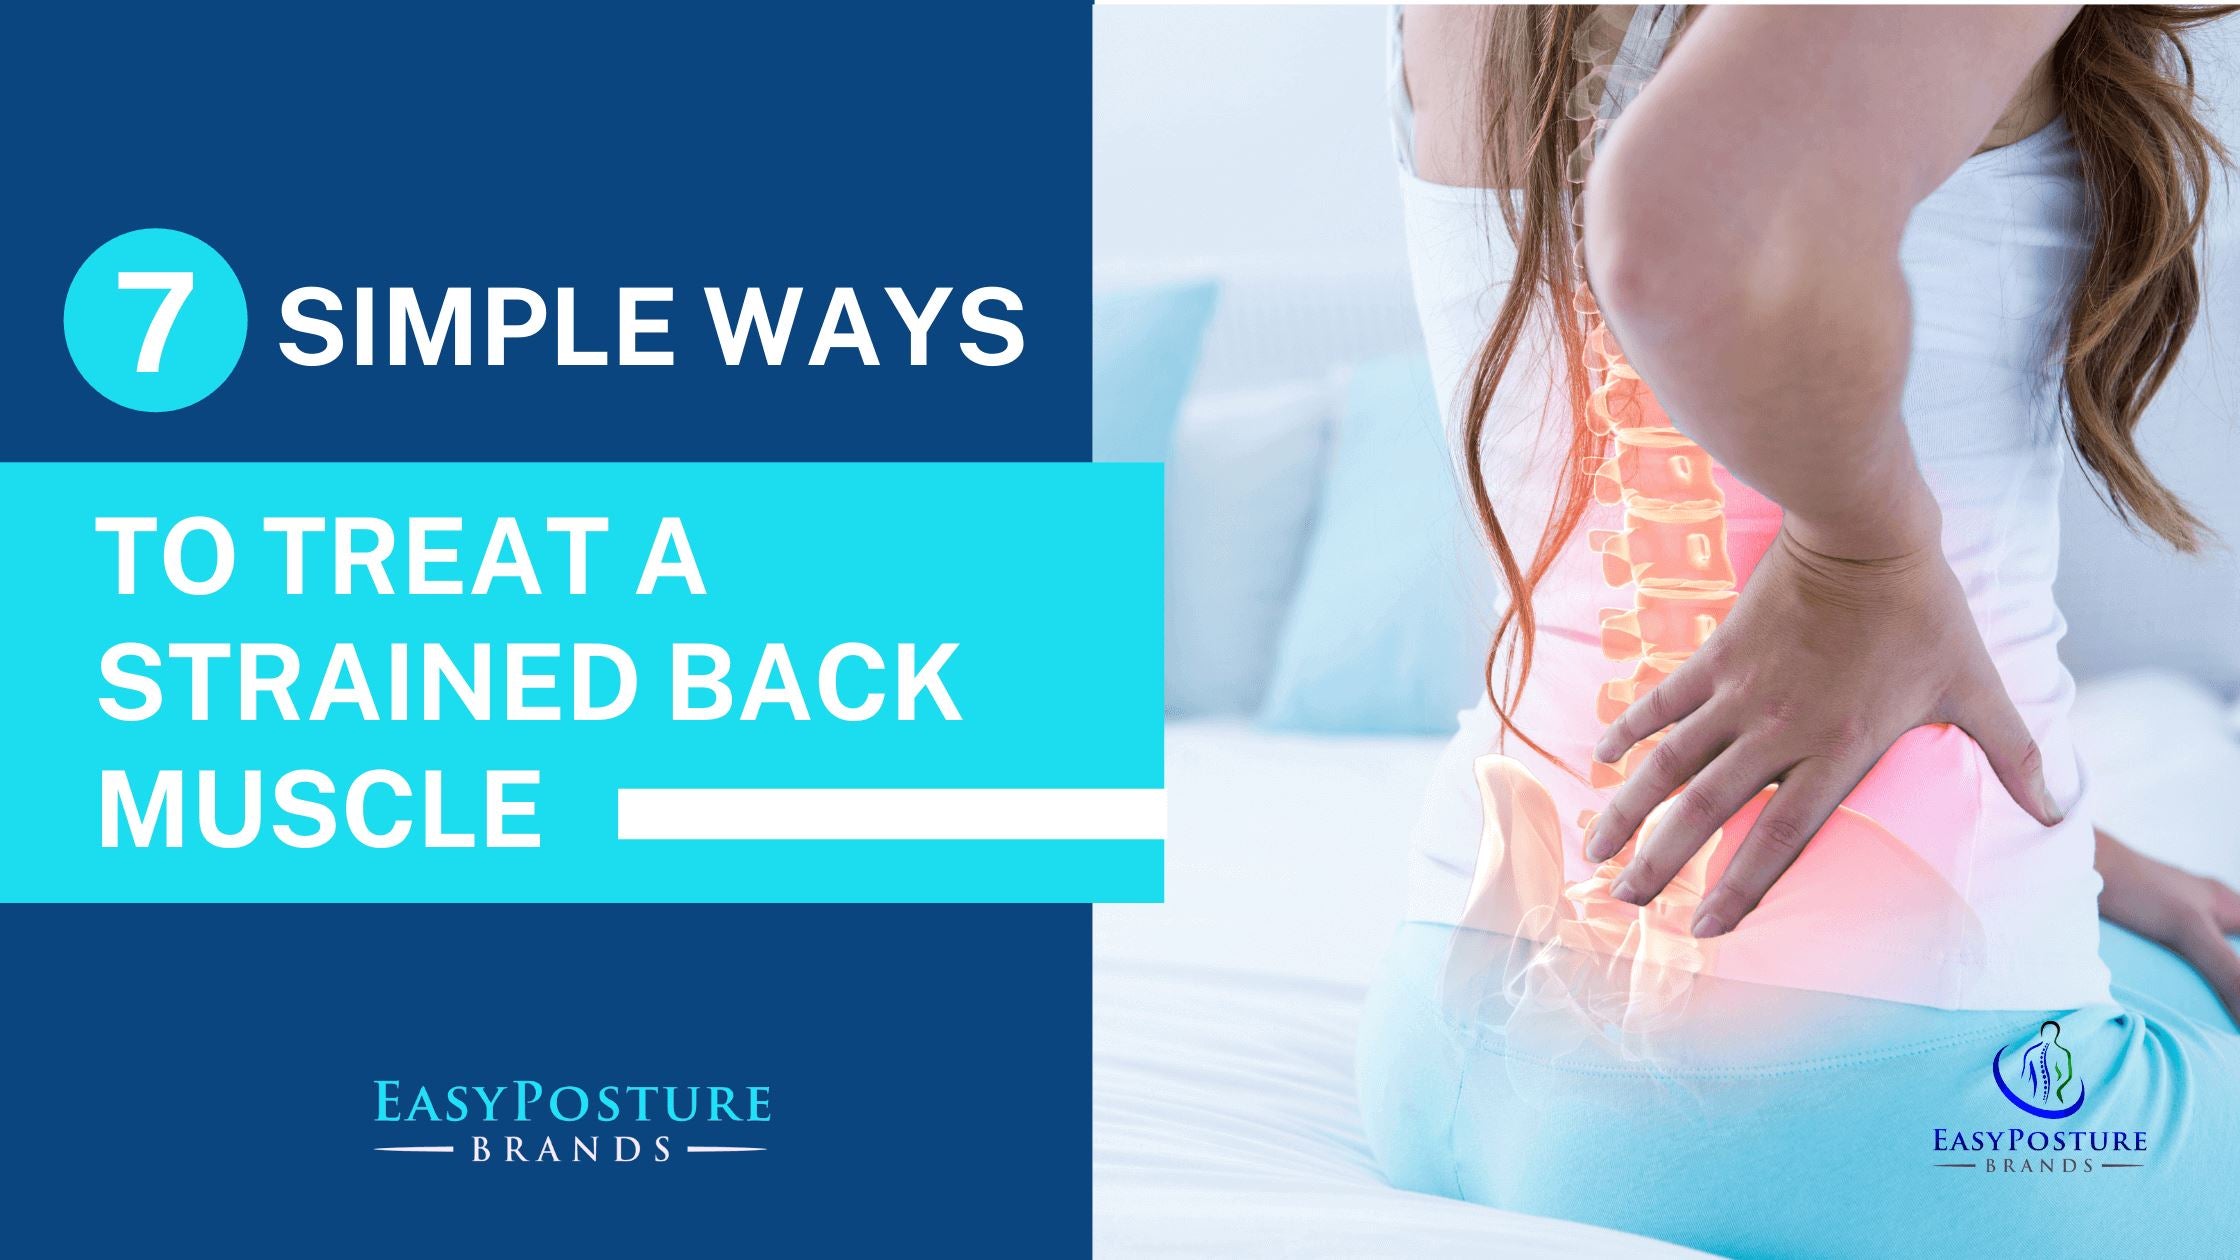 7 Simple Ways to Treat a Strained Back Muscle